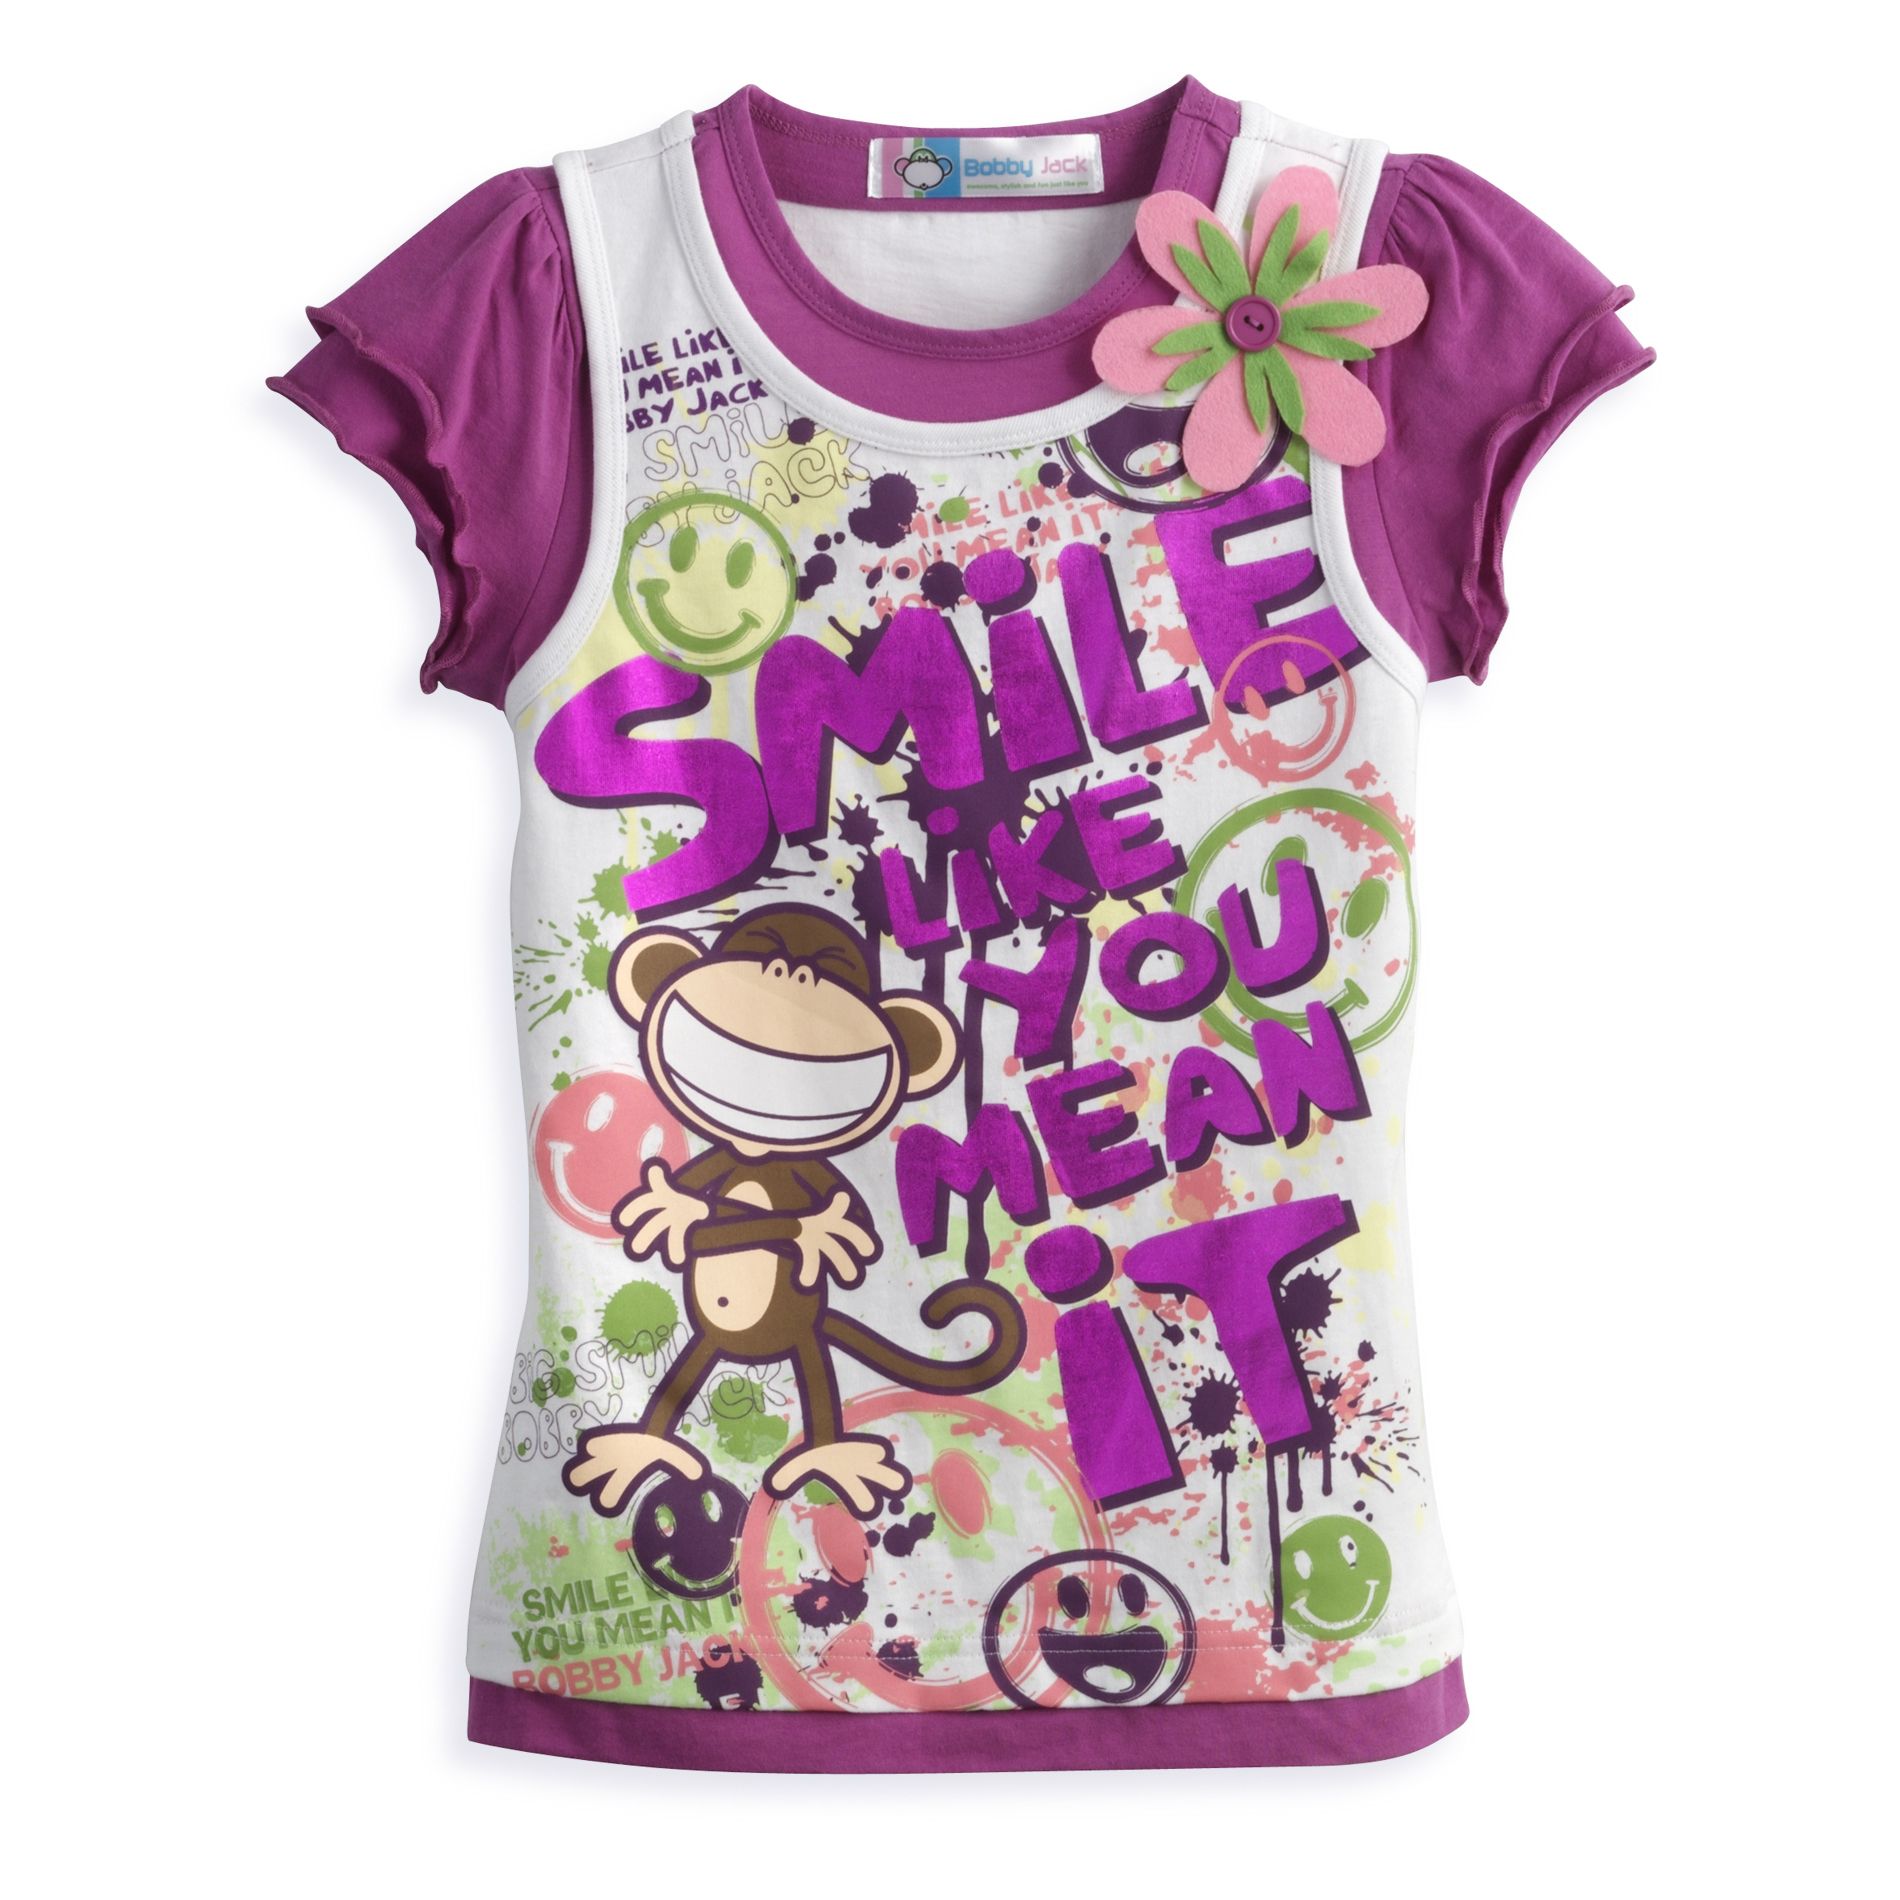 Bobby Jack Girl&#39;s Plus Short Sleeve "Smile Like You Mean It" Screen Tee